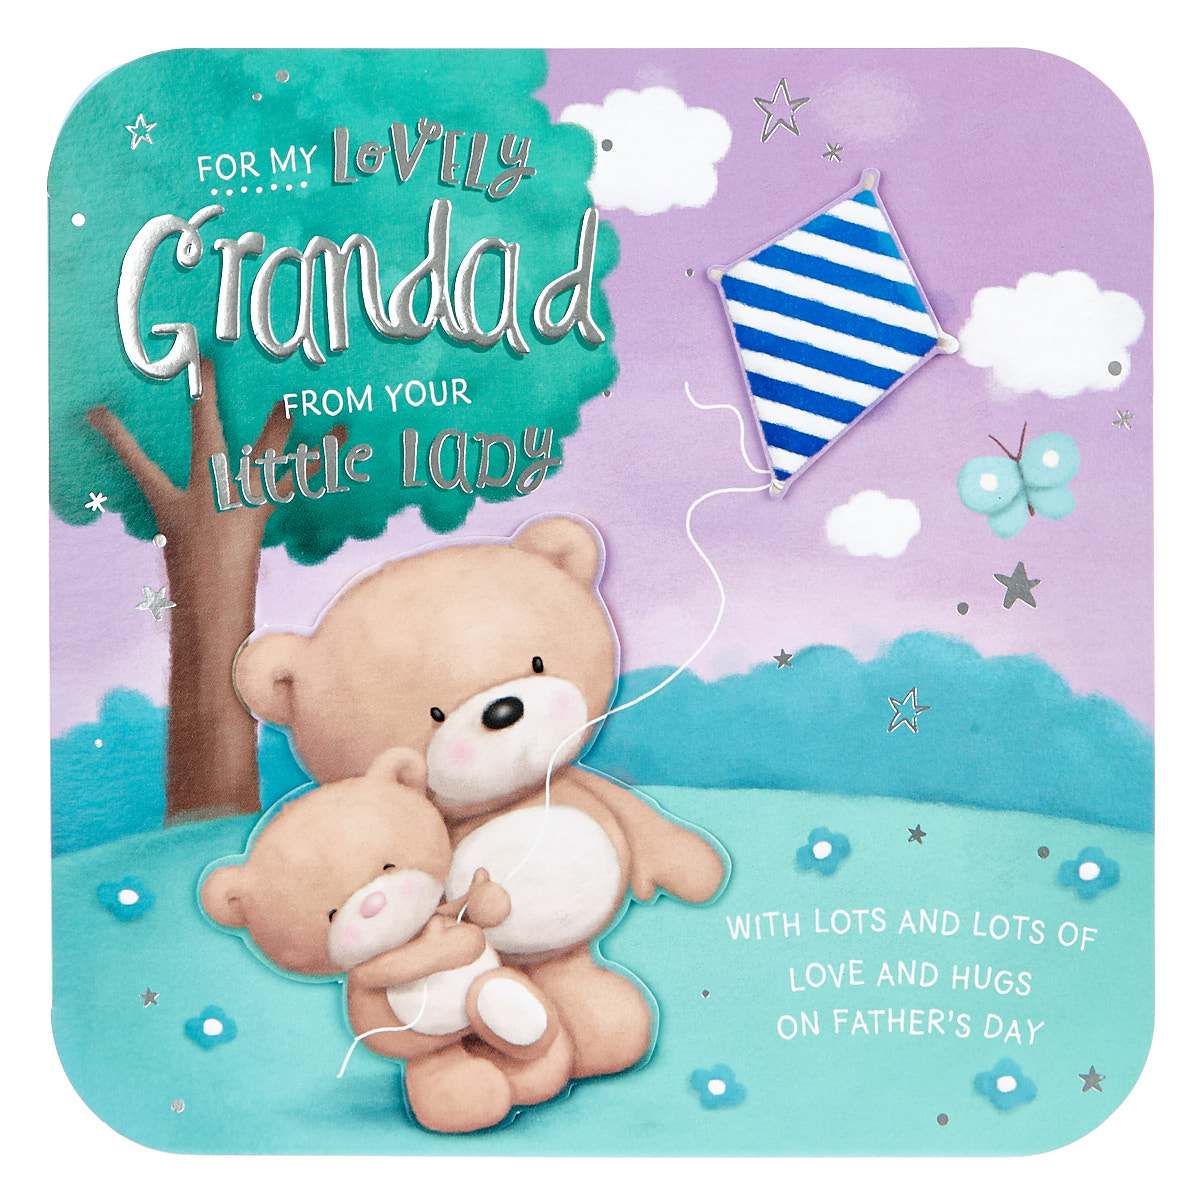 Exquisite Collection Father's Day Card - Grandad From Your Little Lady, Hugs Bear